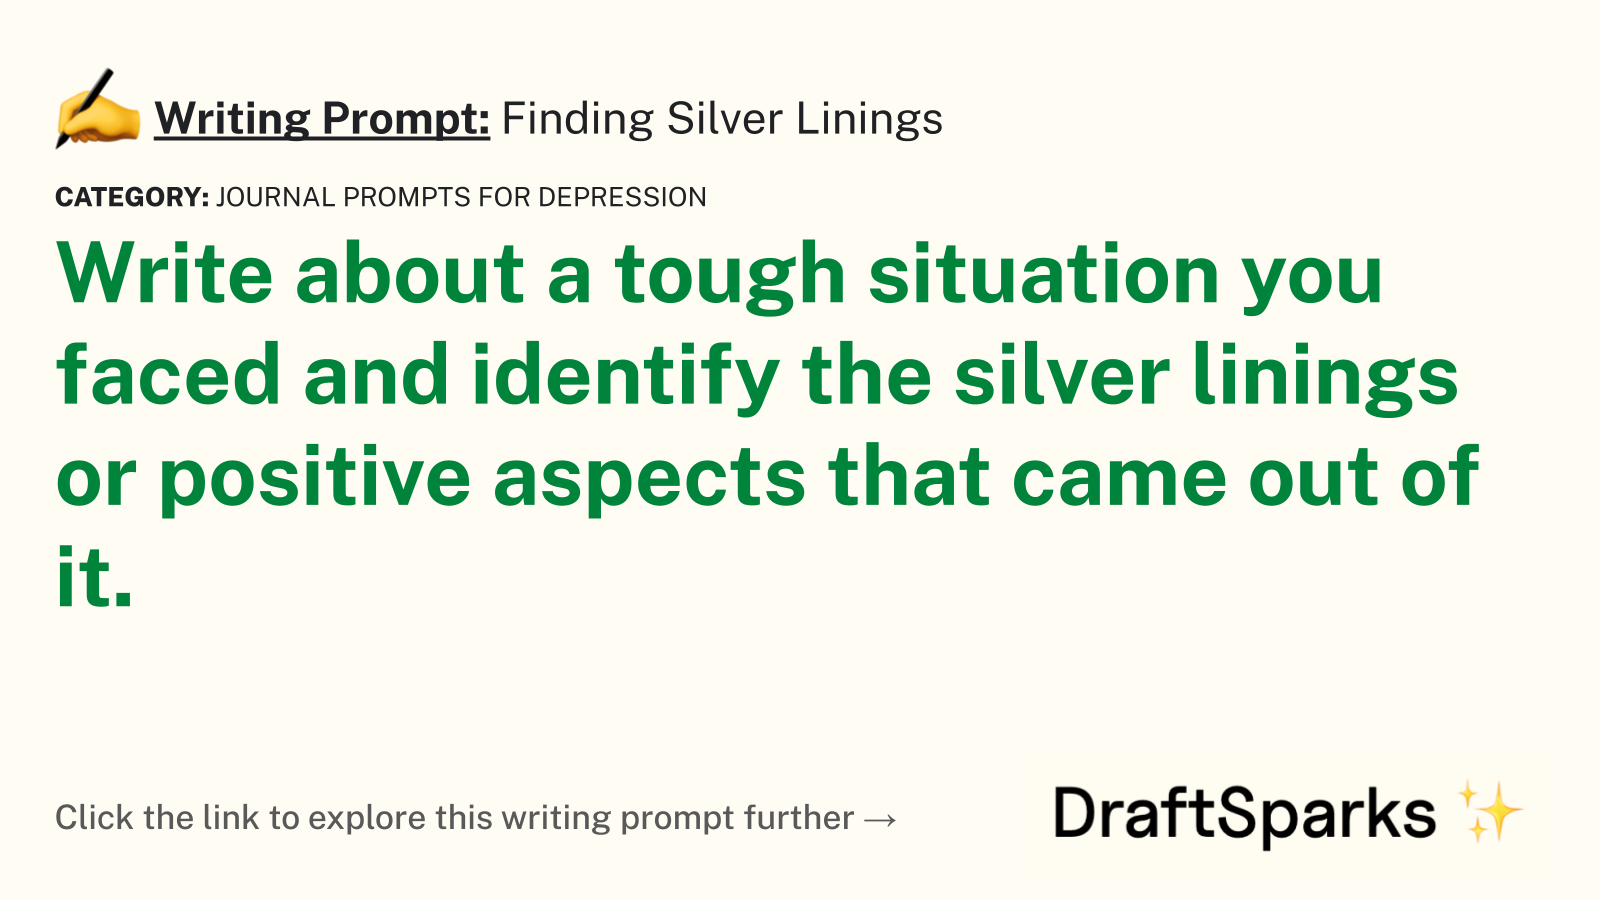 Finding Silver Linings